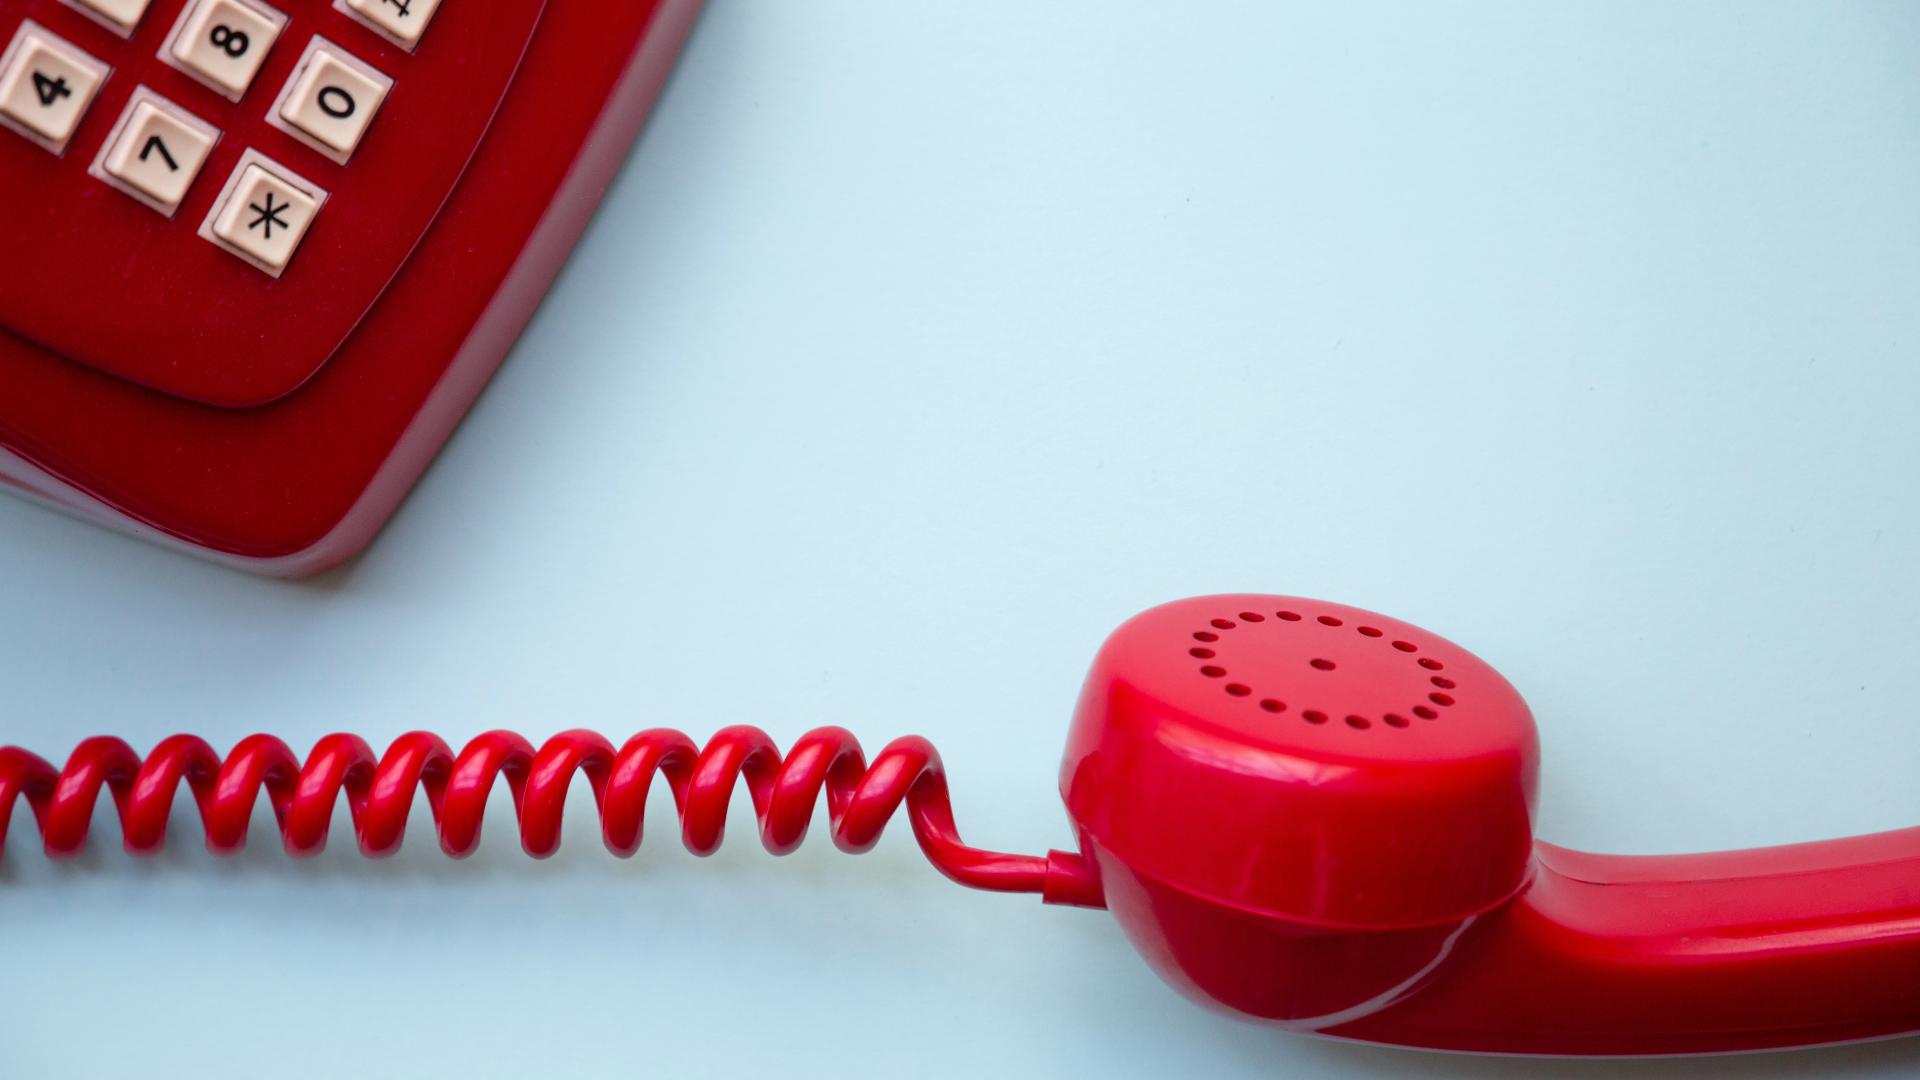 An old style red telephone against a blue background